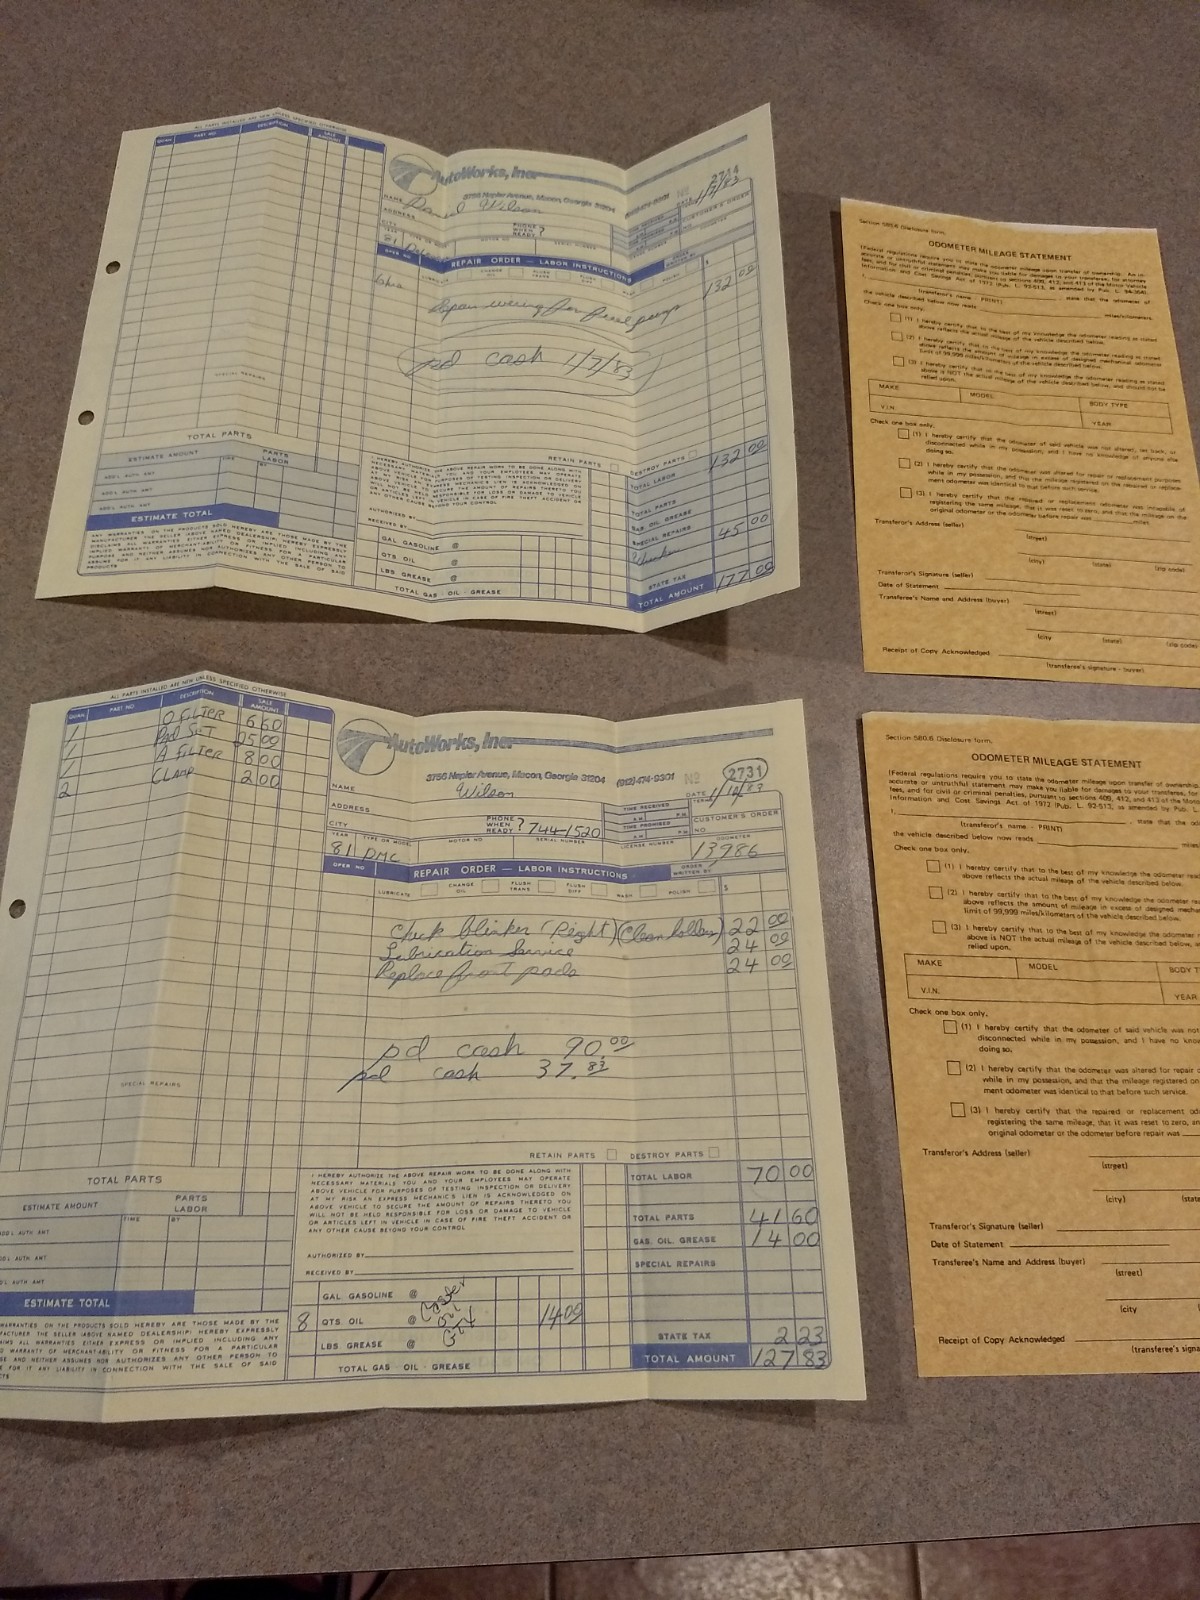 Owners Manual, Maintenance Record, Caddy